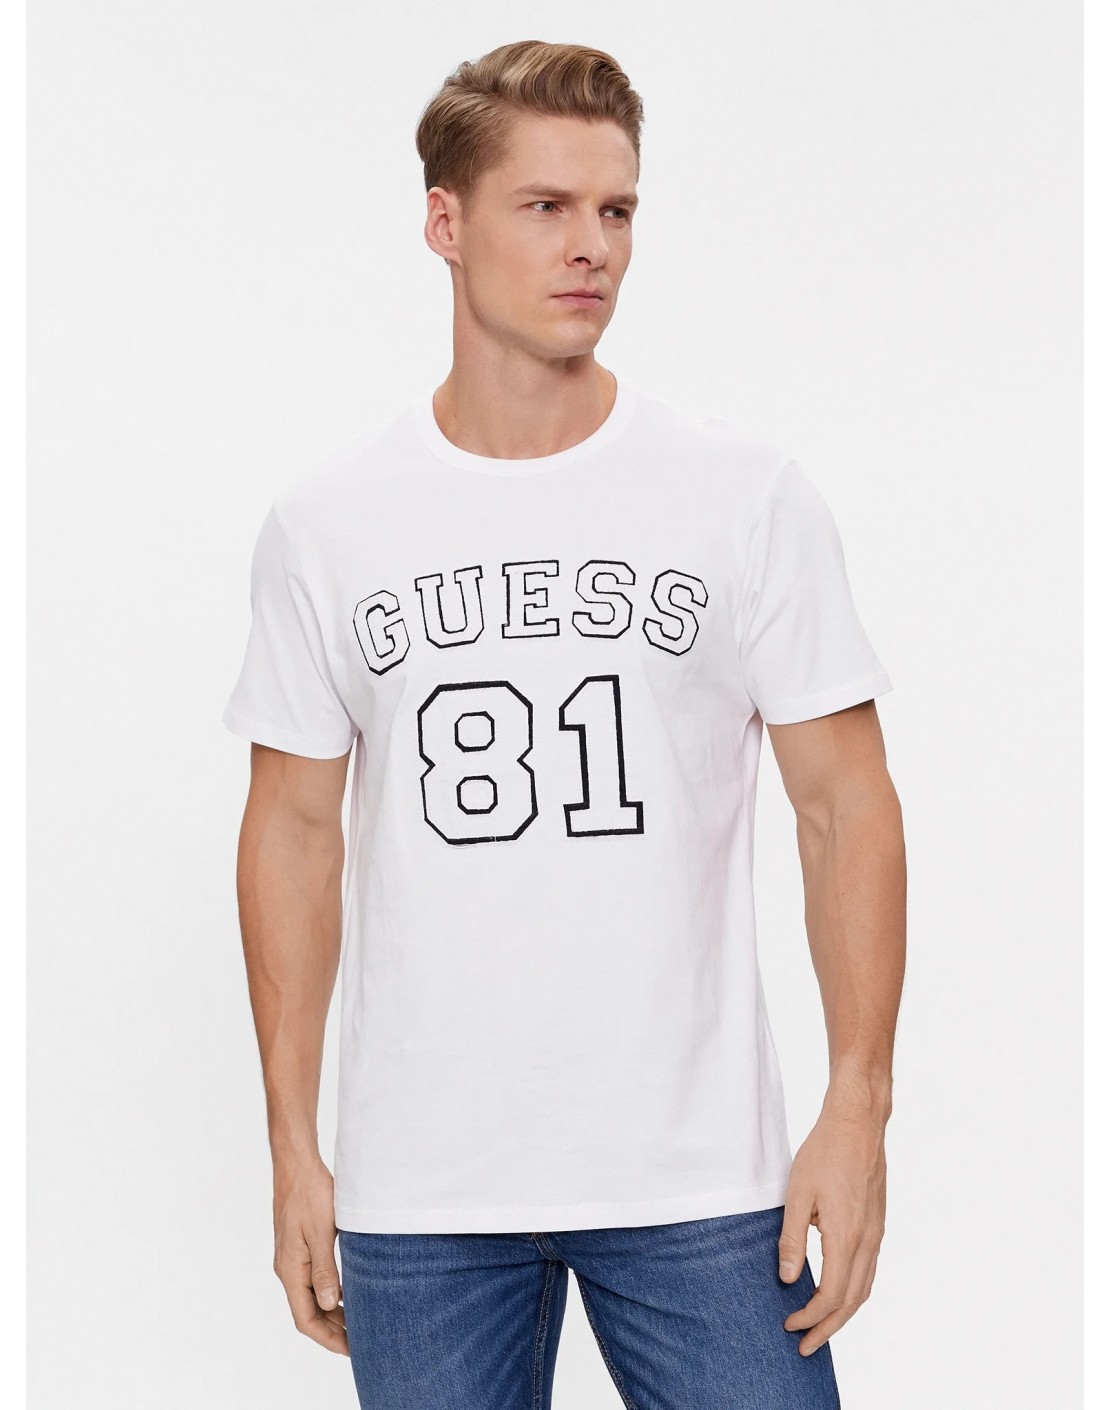 Guess Camiseta SS CN Guess 81 Patch Tee